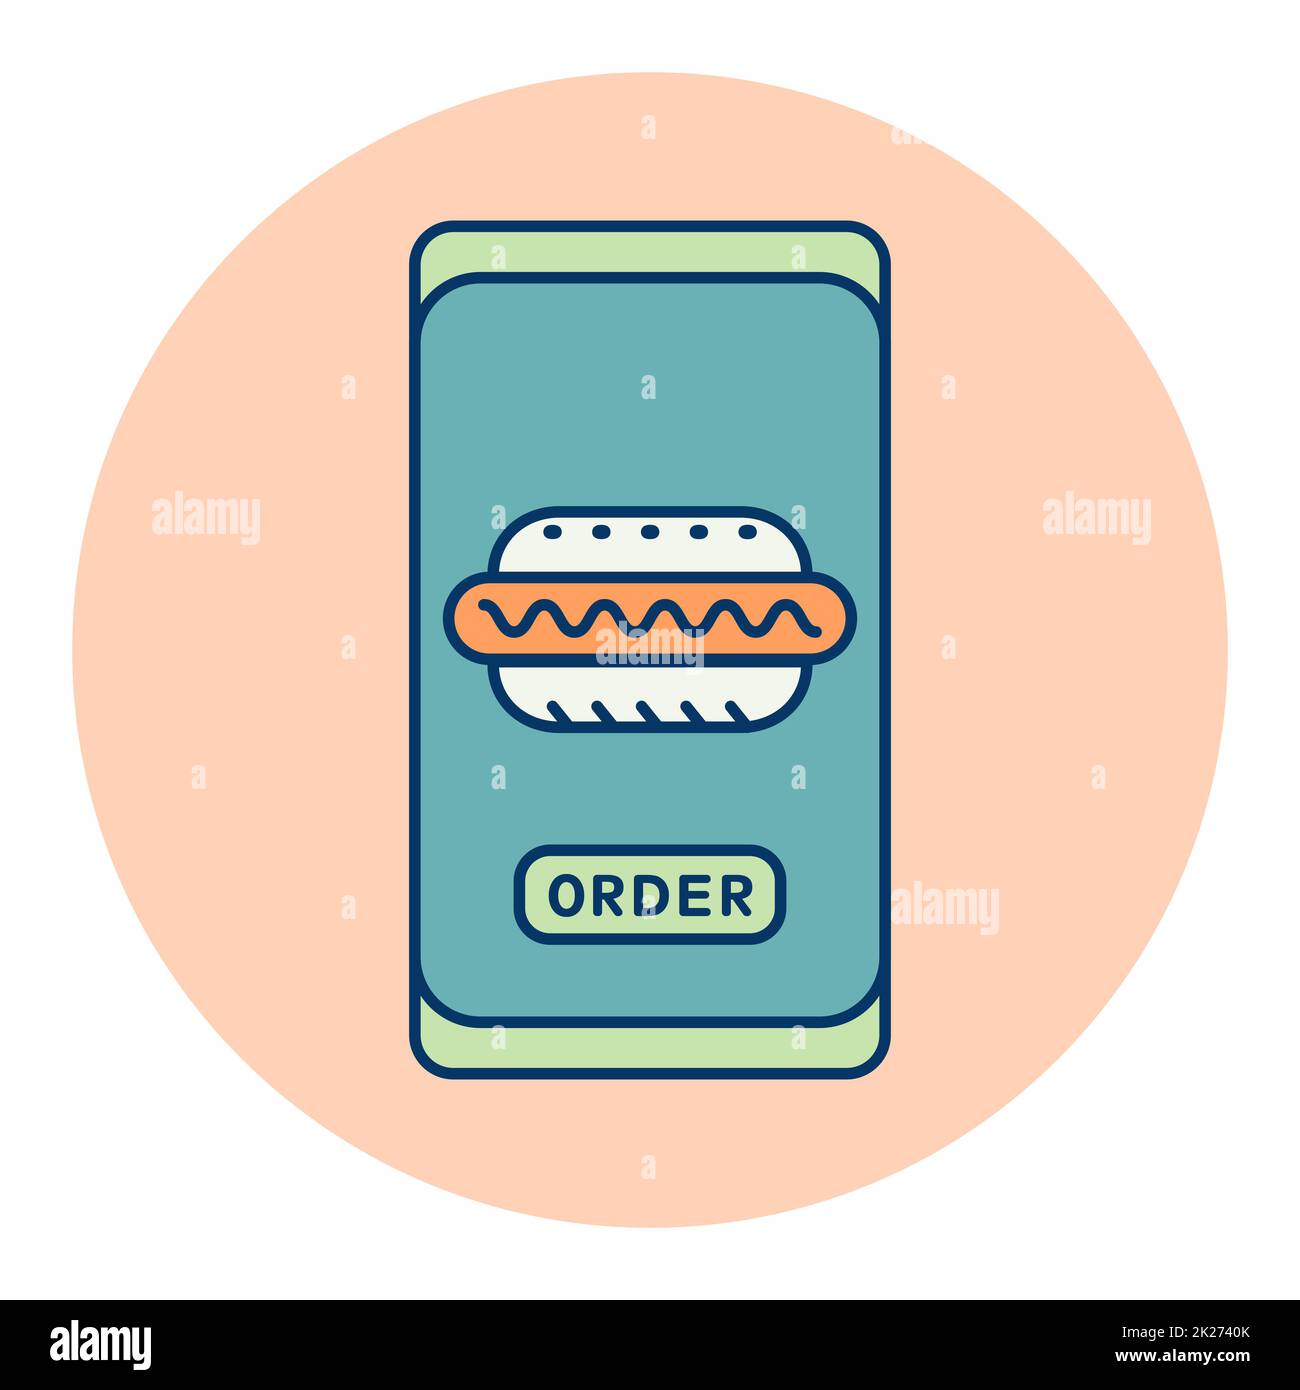 Fast food delivery service vector icon Stock Photo